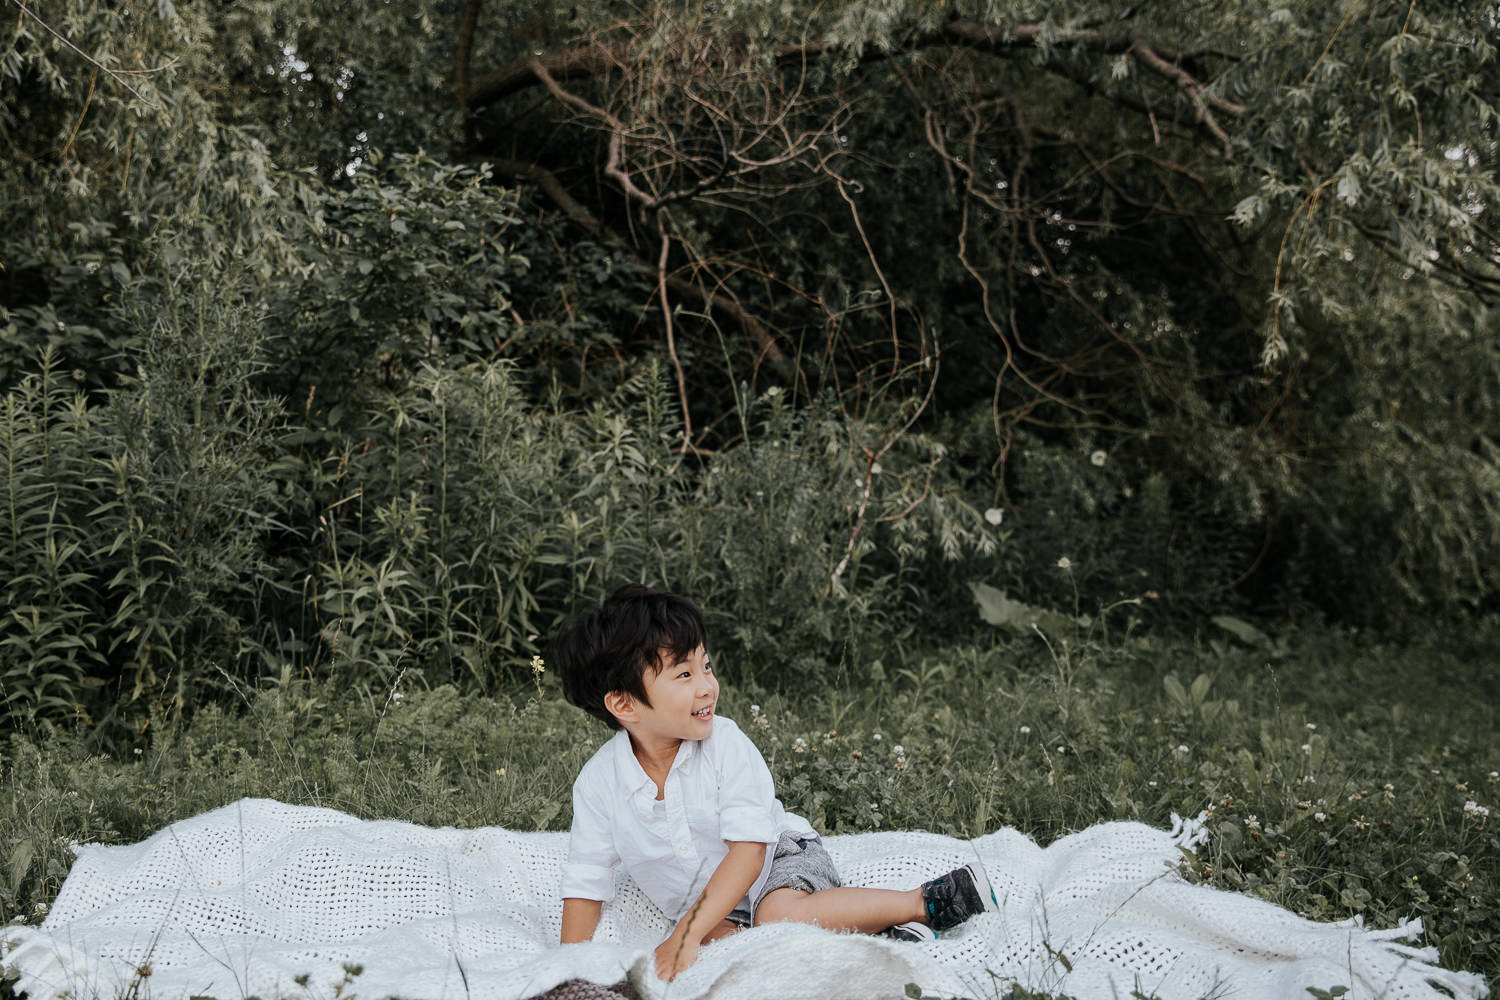  3 year old toddler boy with dark hair wearing white button down top and grey shorts sitting on white blanket in front of greenery and smiling and looking to the side - Barrie In-Home Photos